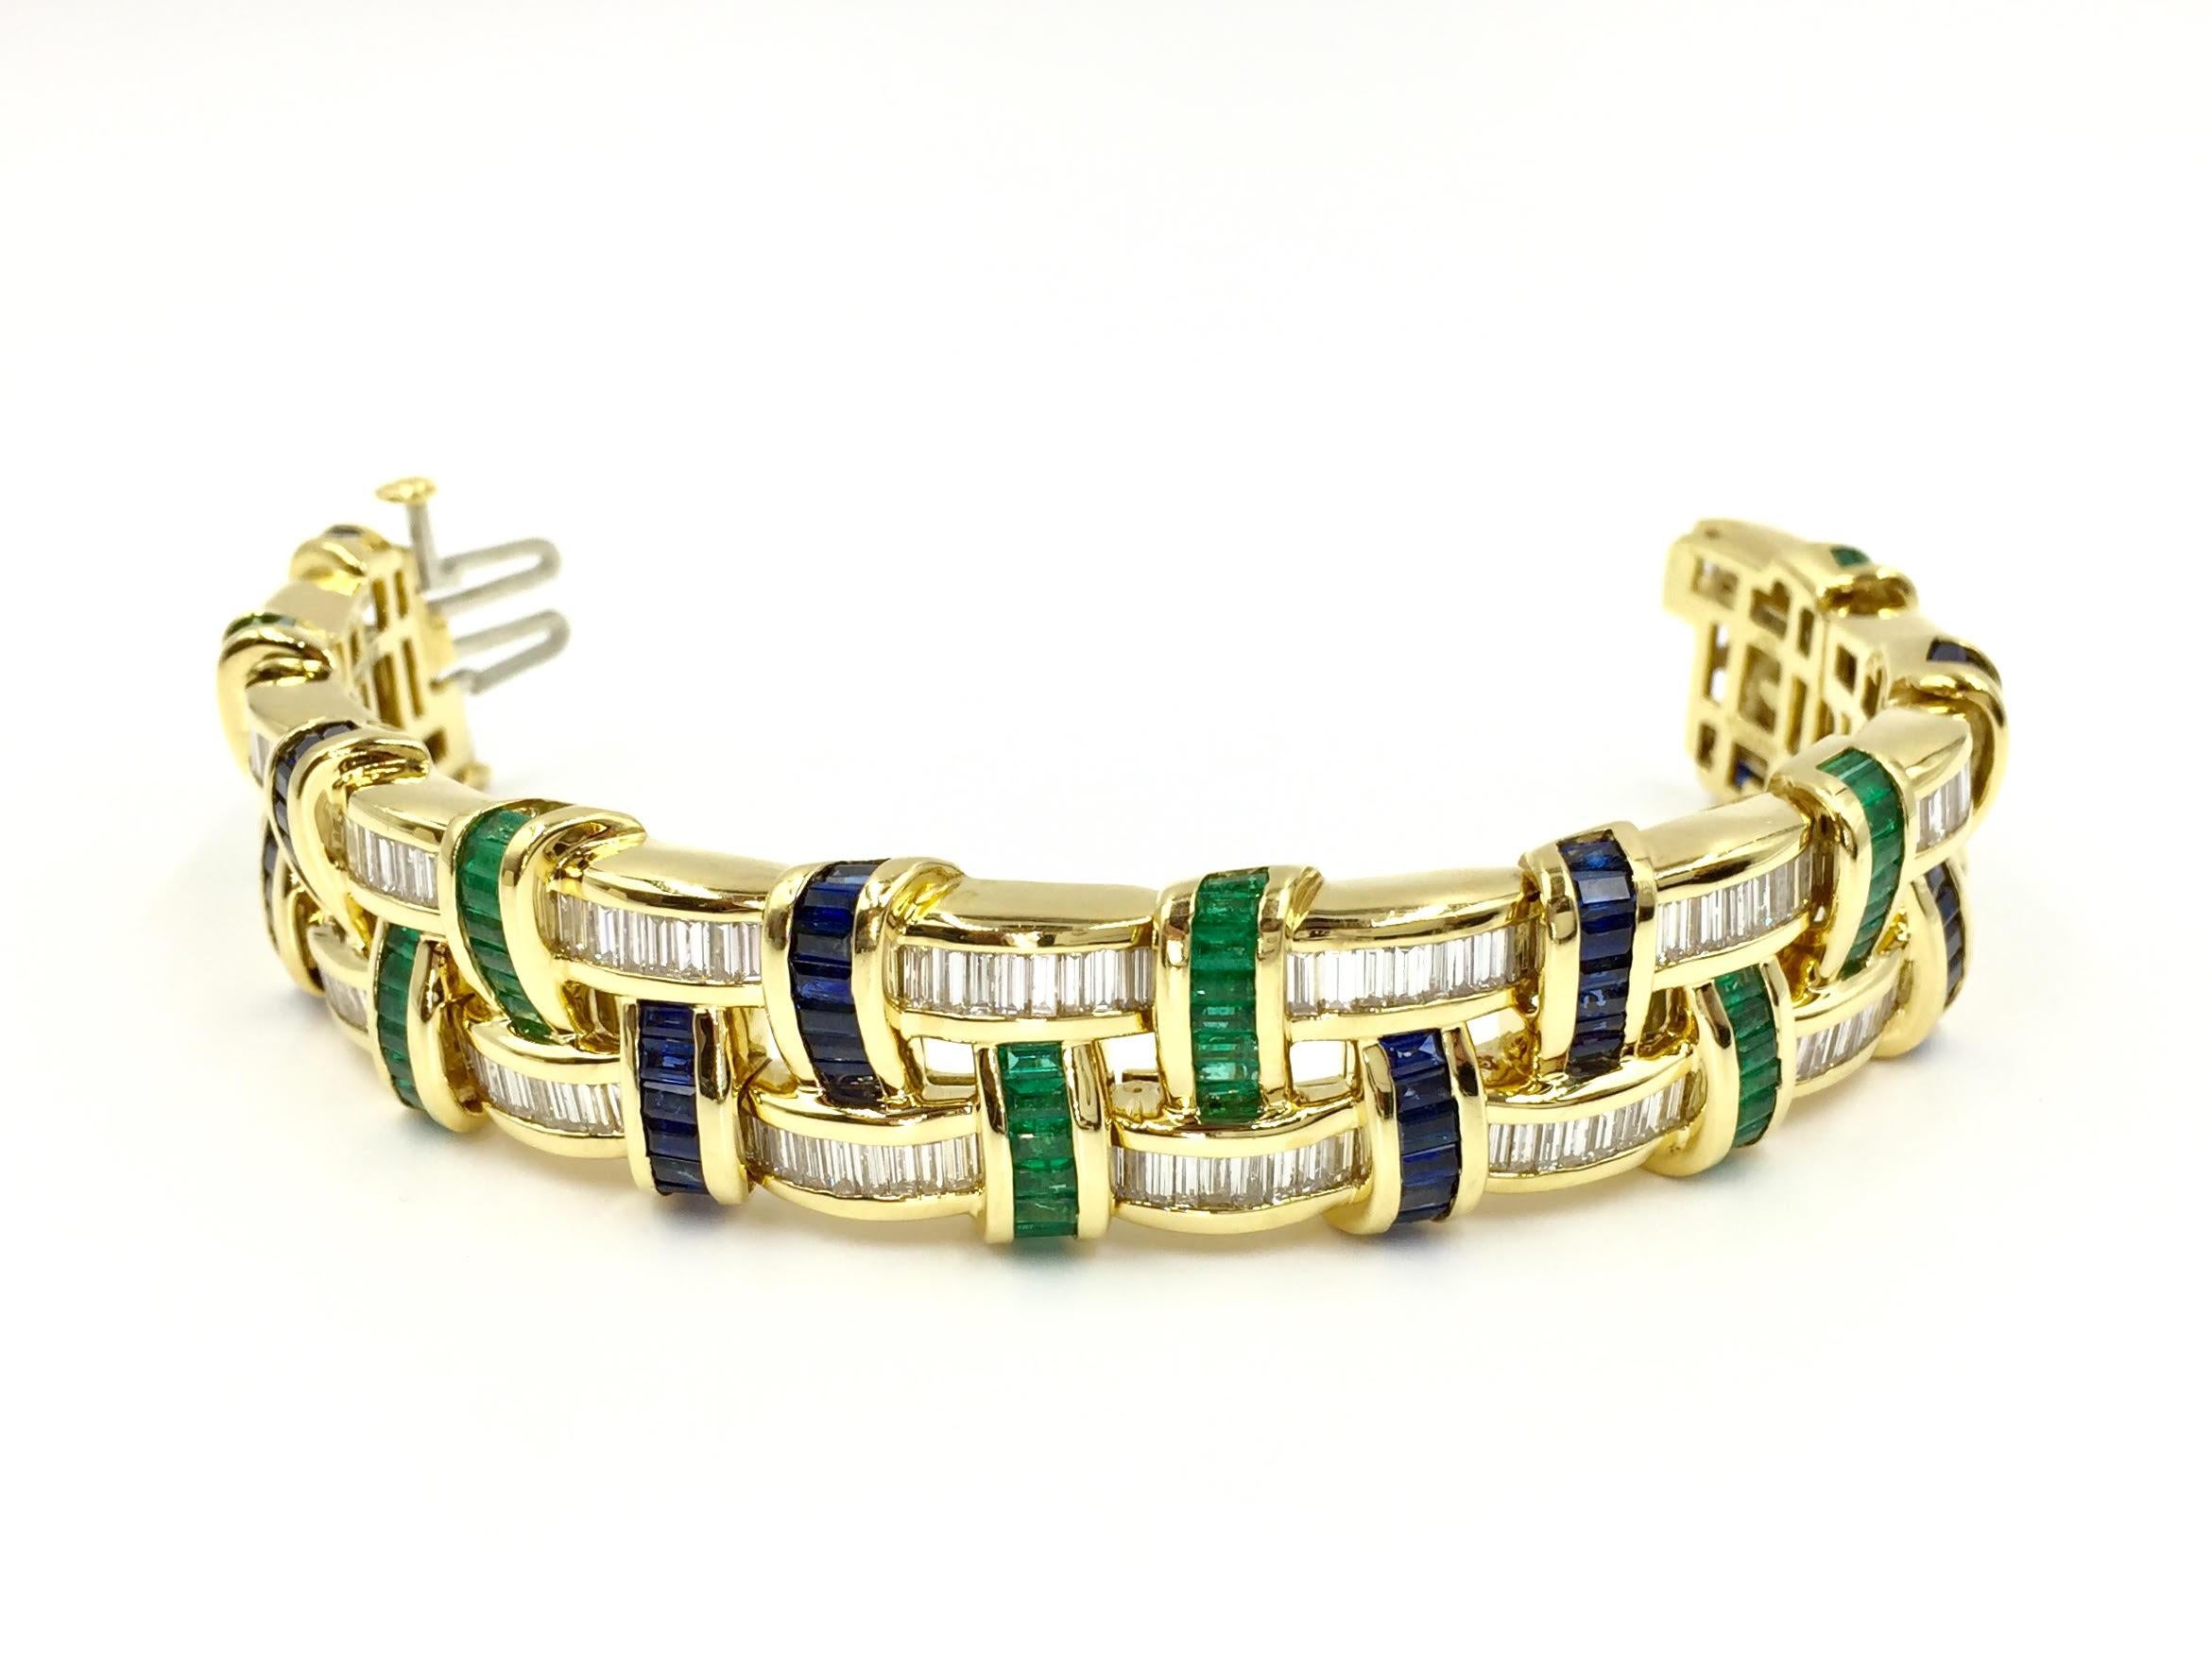 Contemporary Diamond, Sapphire and Emerald Wide 18 Karat Bracelet by Charles Krypell For Sale